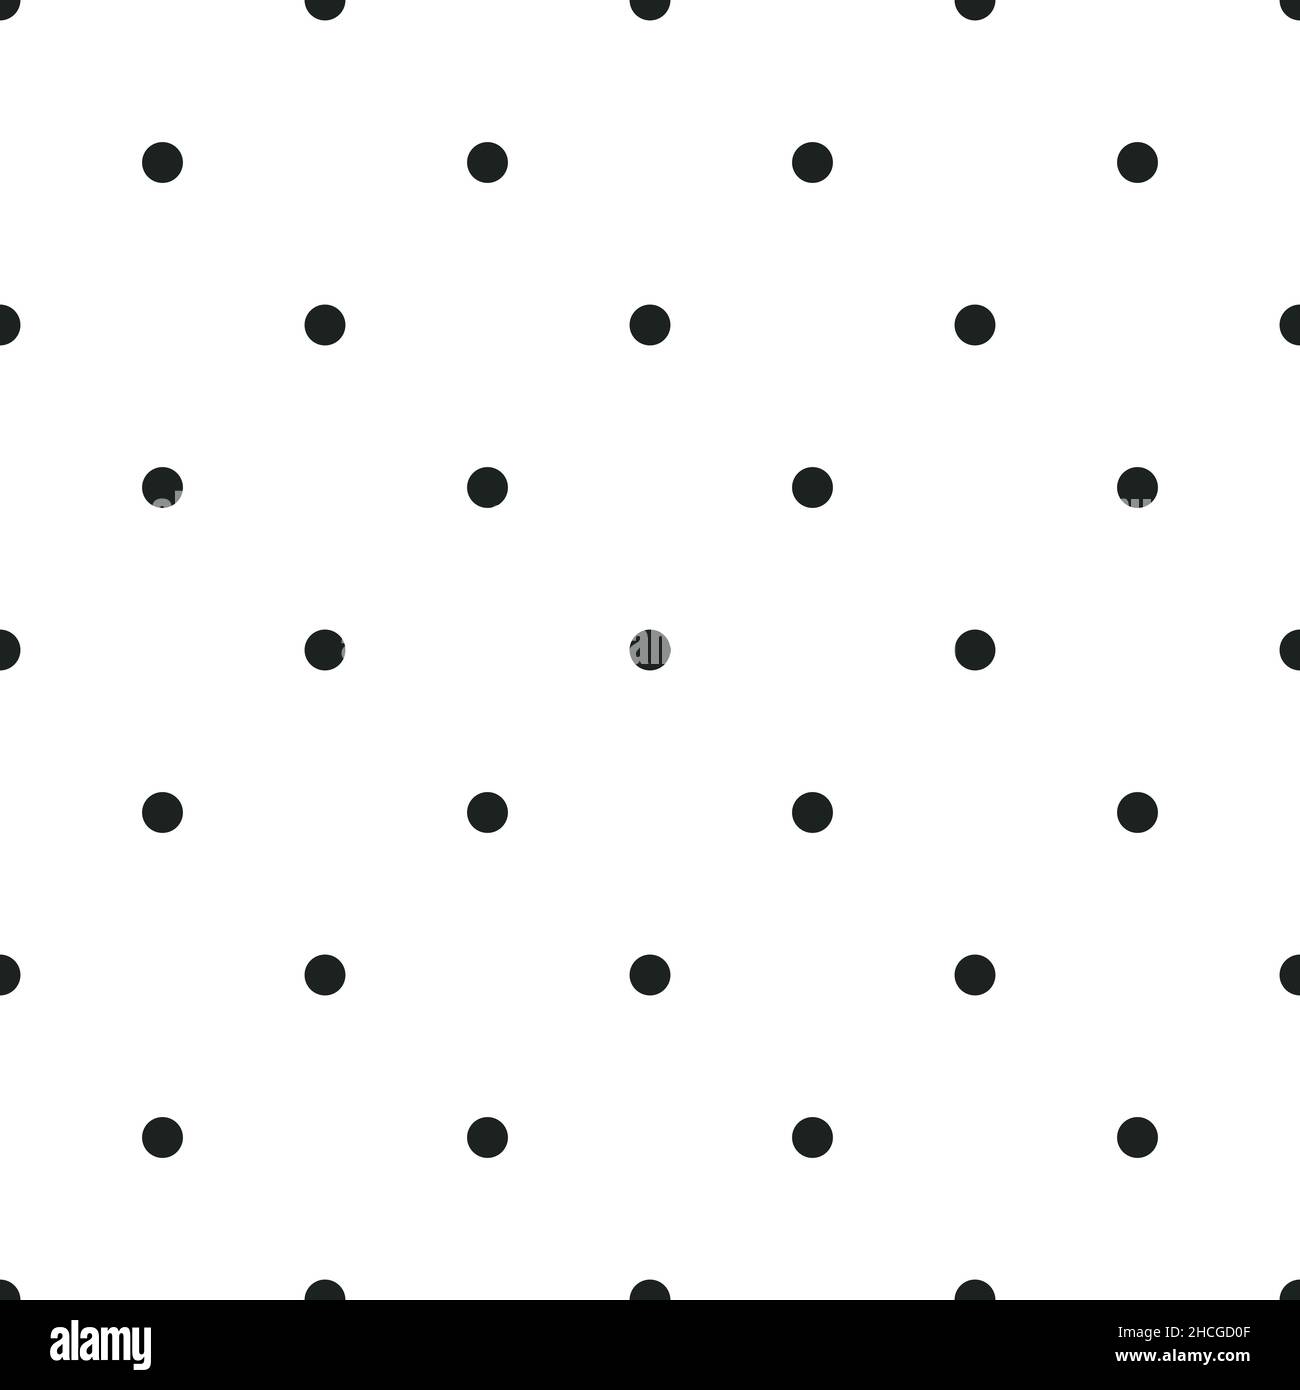 Simple black circles geometric christmas pattern on white background for wrapping paper vector illustration Stock Vector